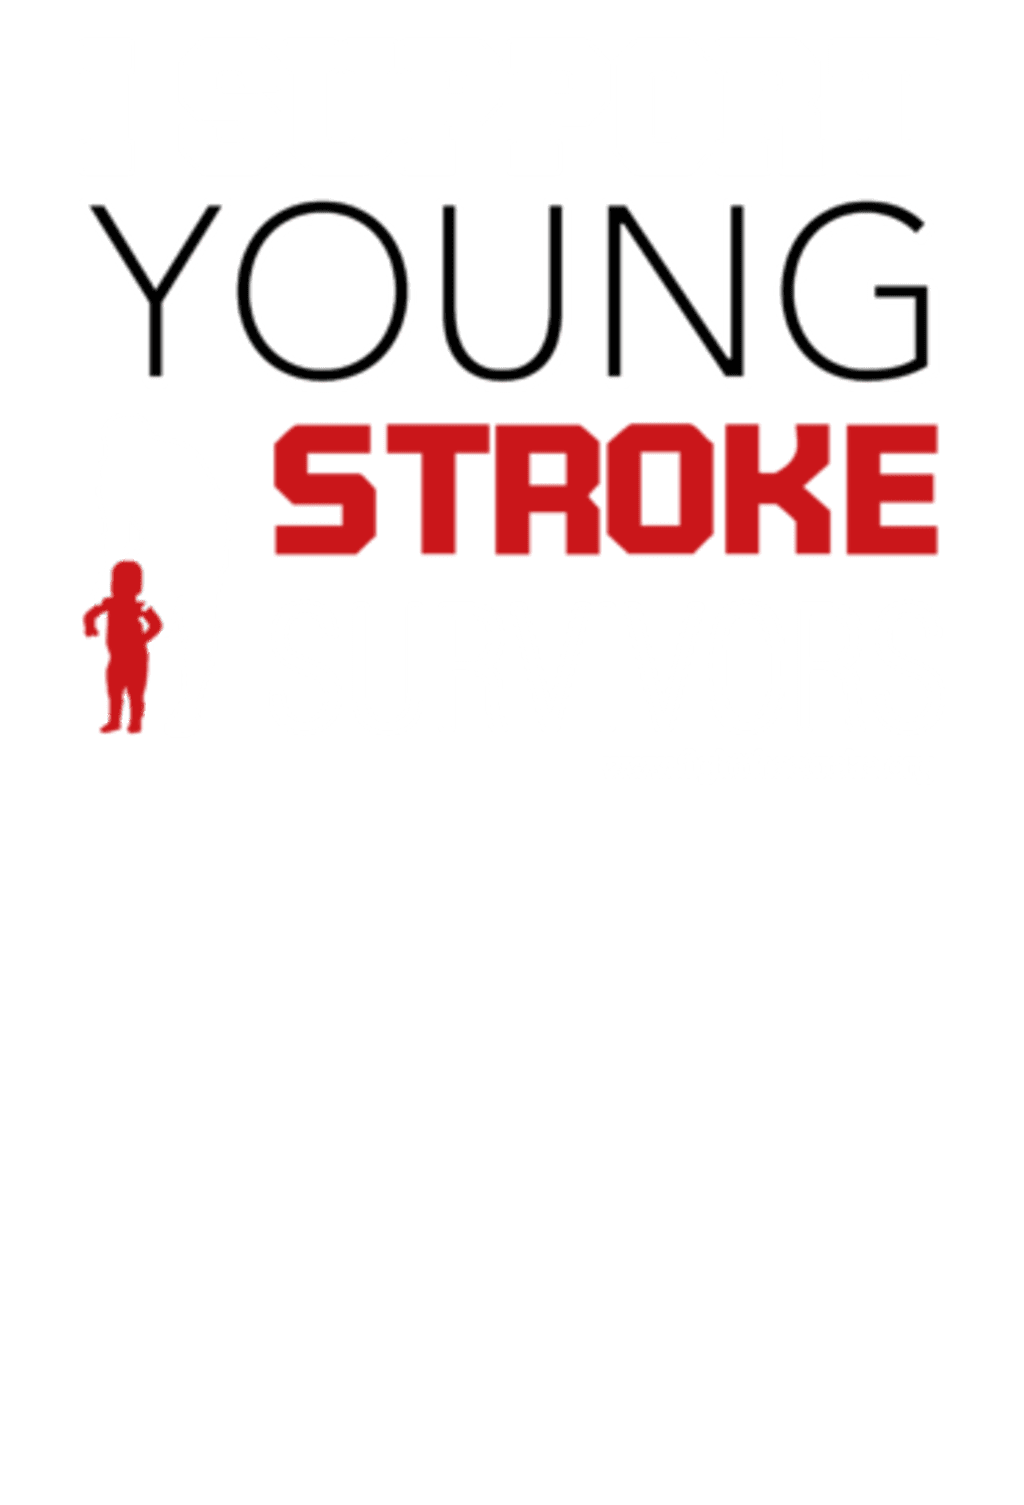 Support young stroke survivors Typography nera